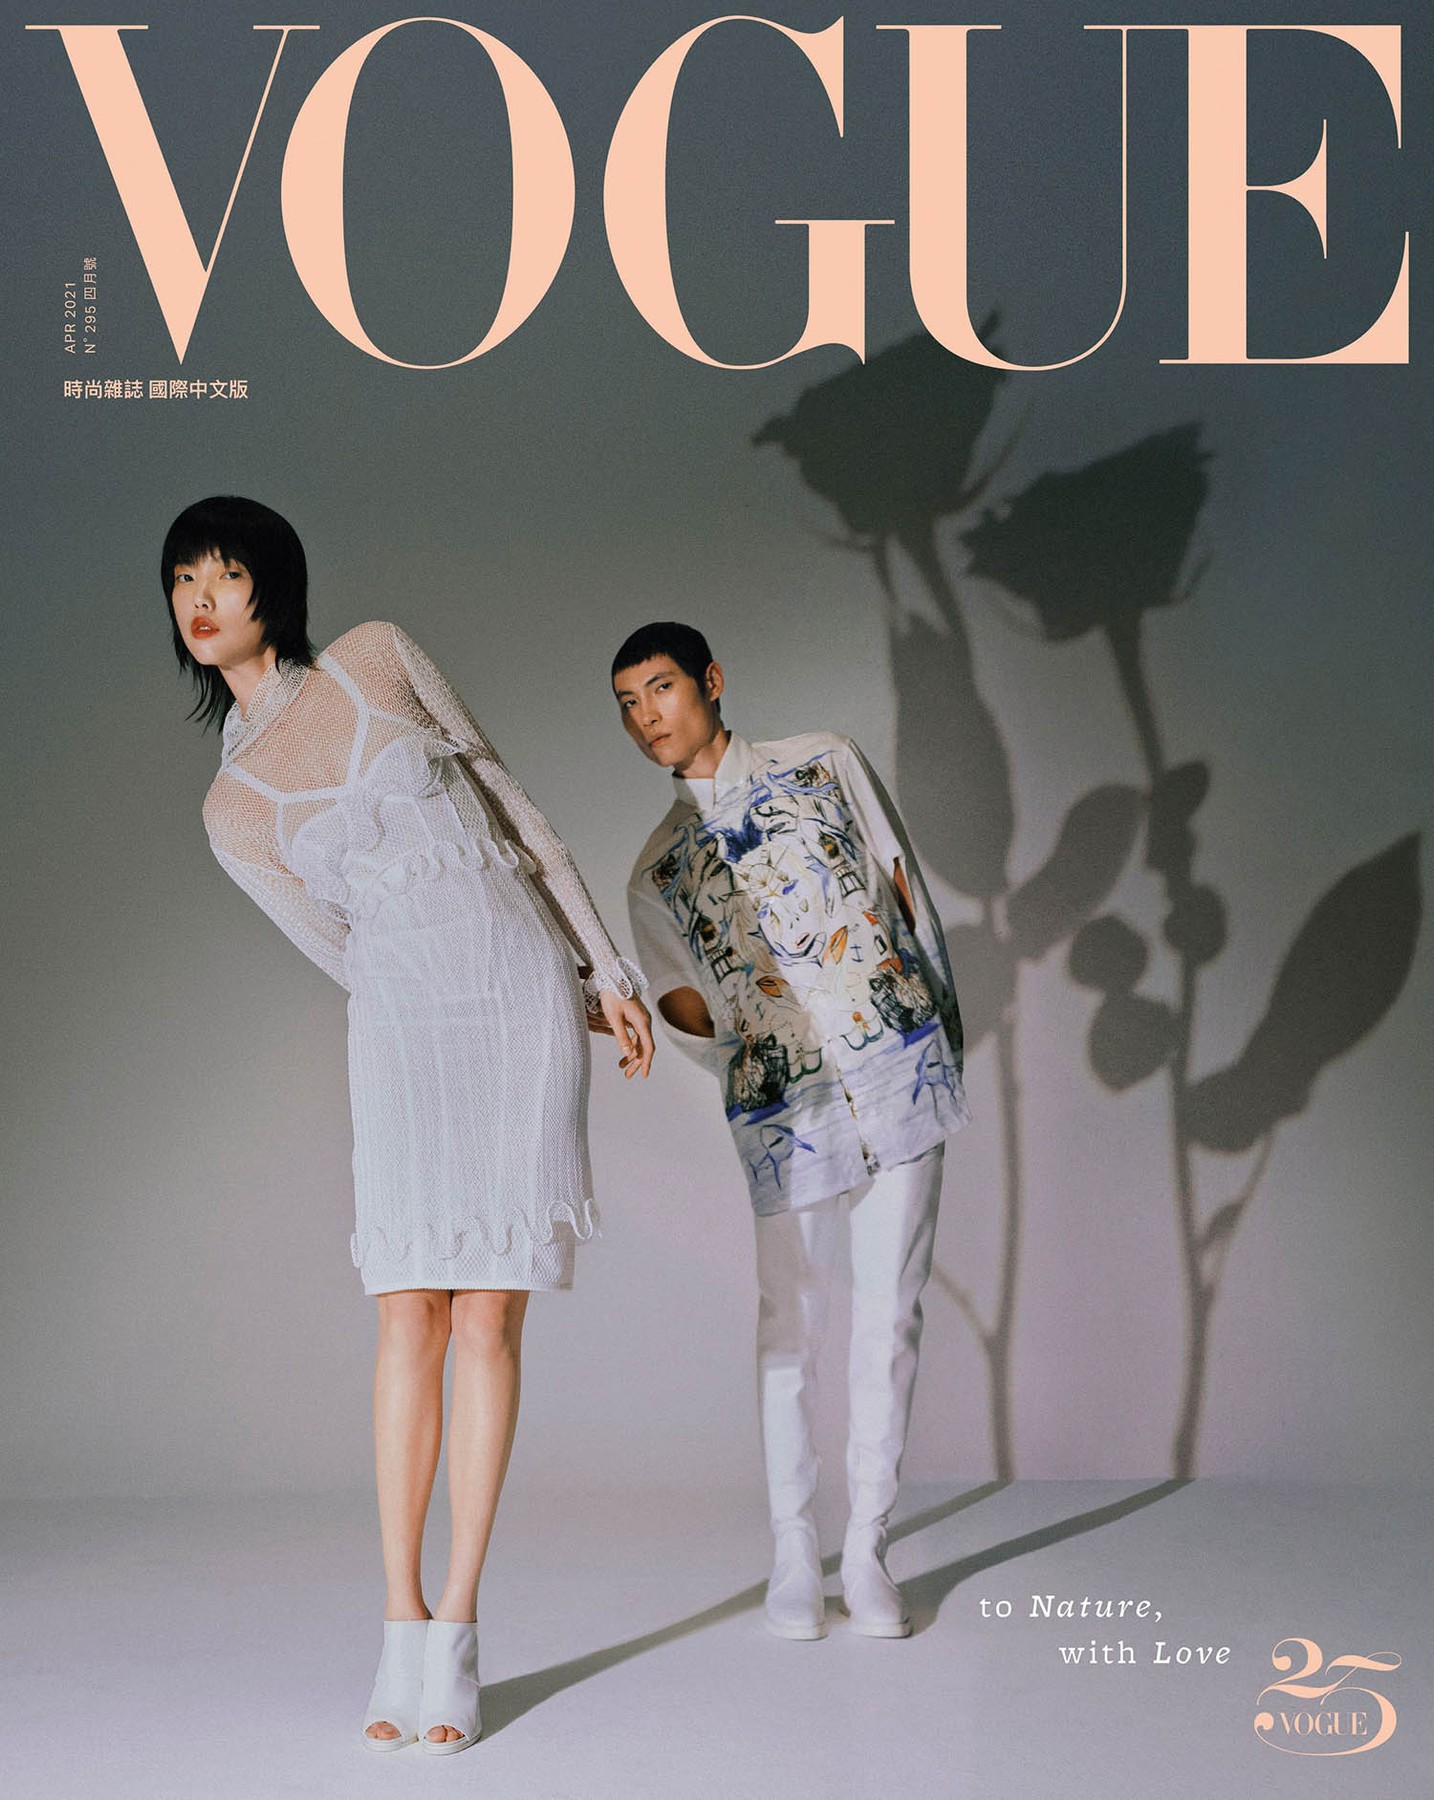 jessie-hsu-and-jean-chang-cover-vogue-taiwan-april-2021-by-zhong-lin-2.jpg